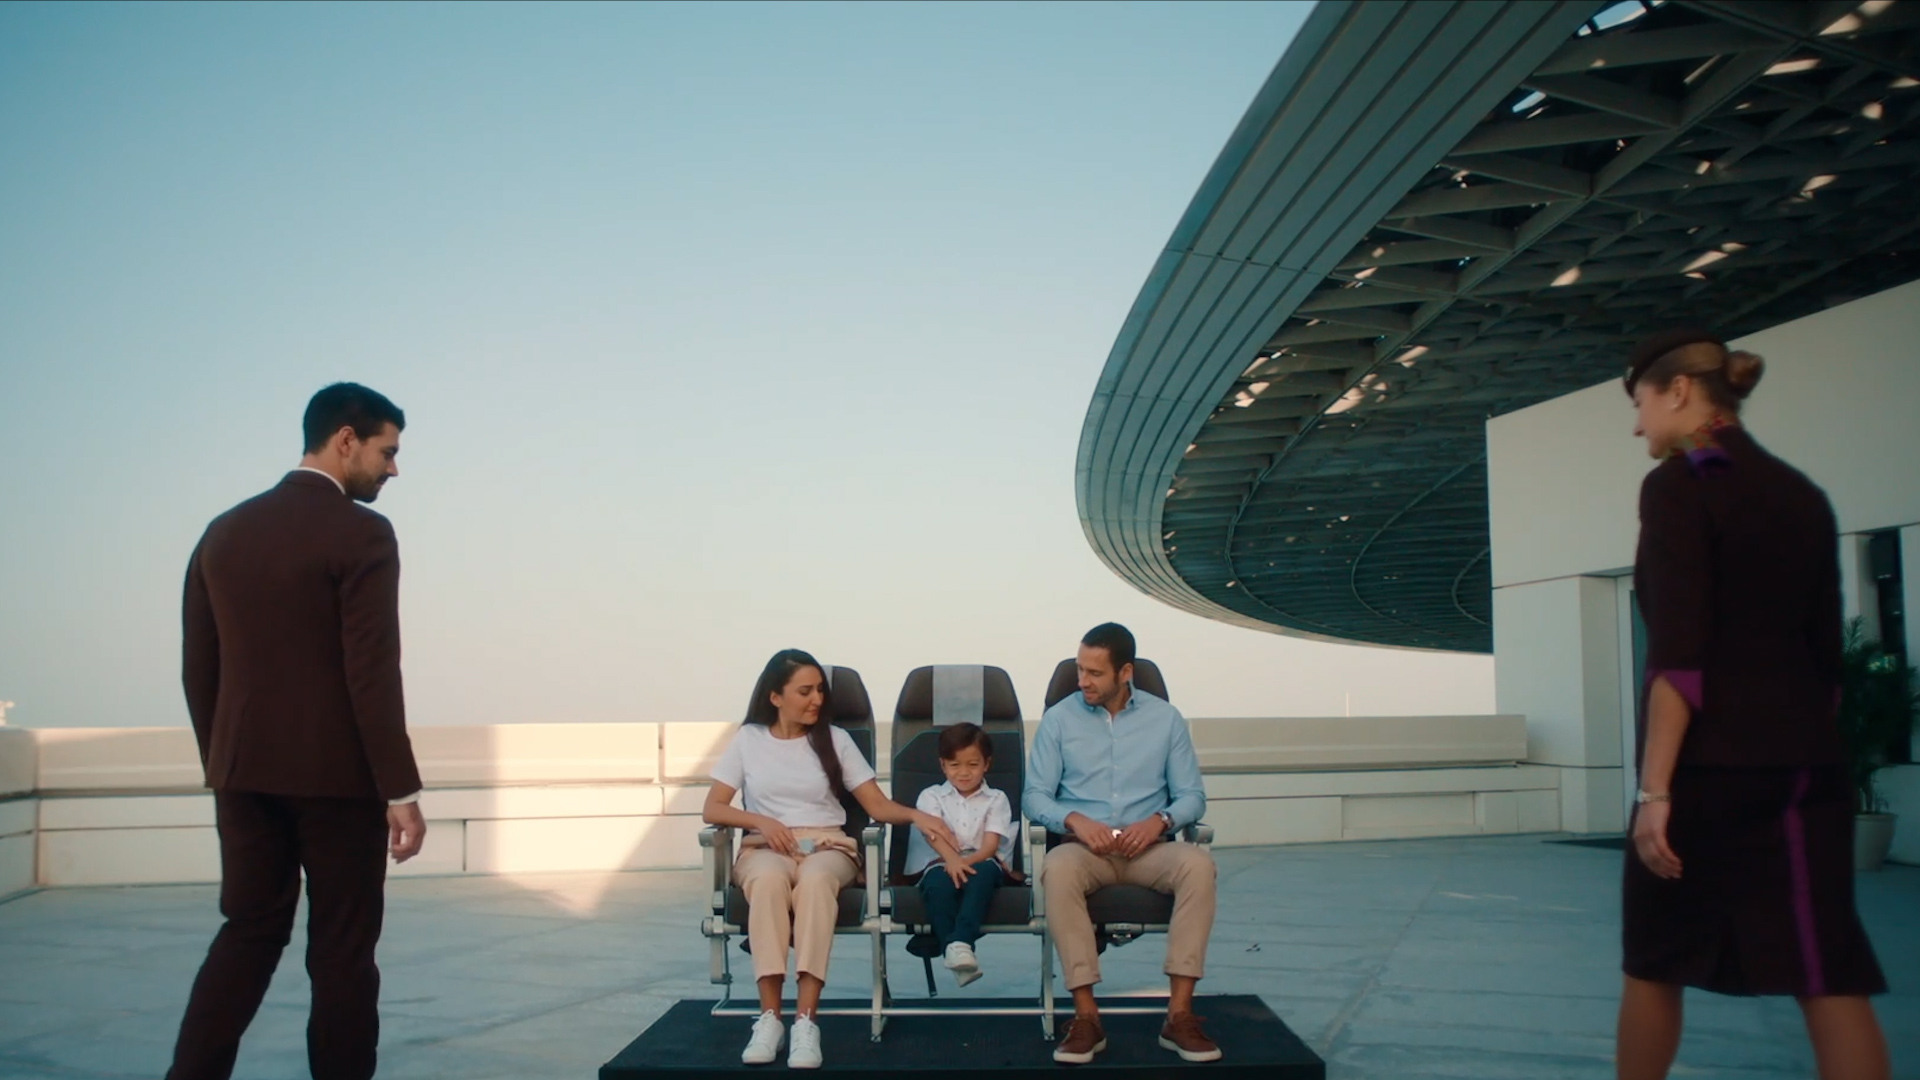 Etihad Airways Reveals New Safety Video Showcasing The Iconic Louvre Abu Dhabi